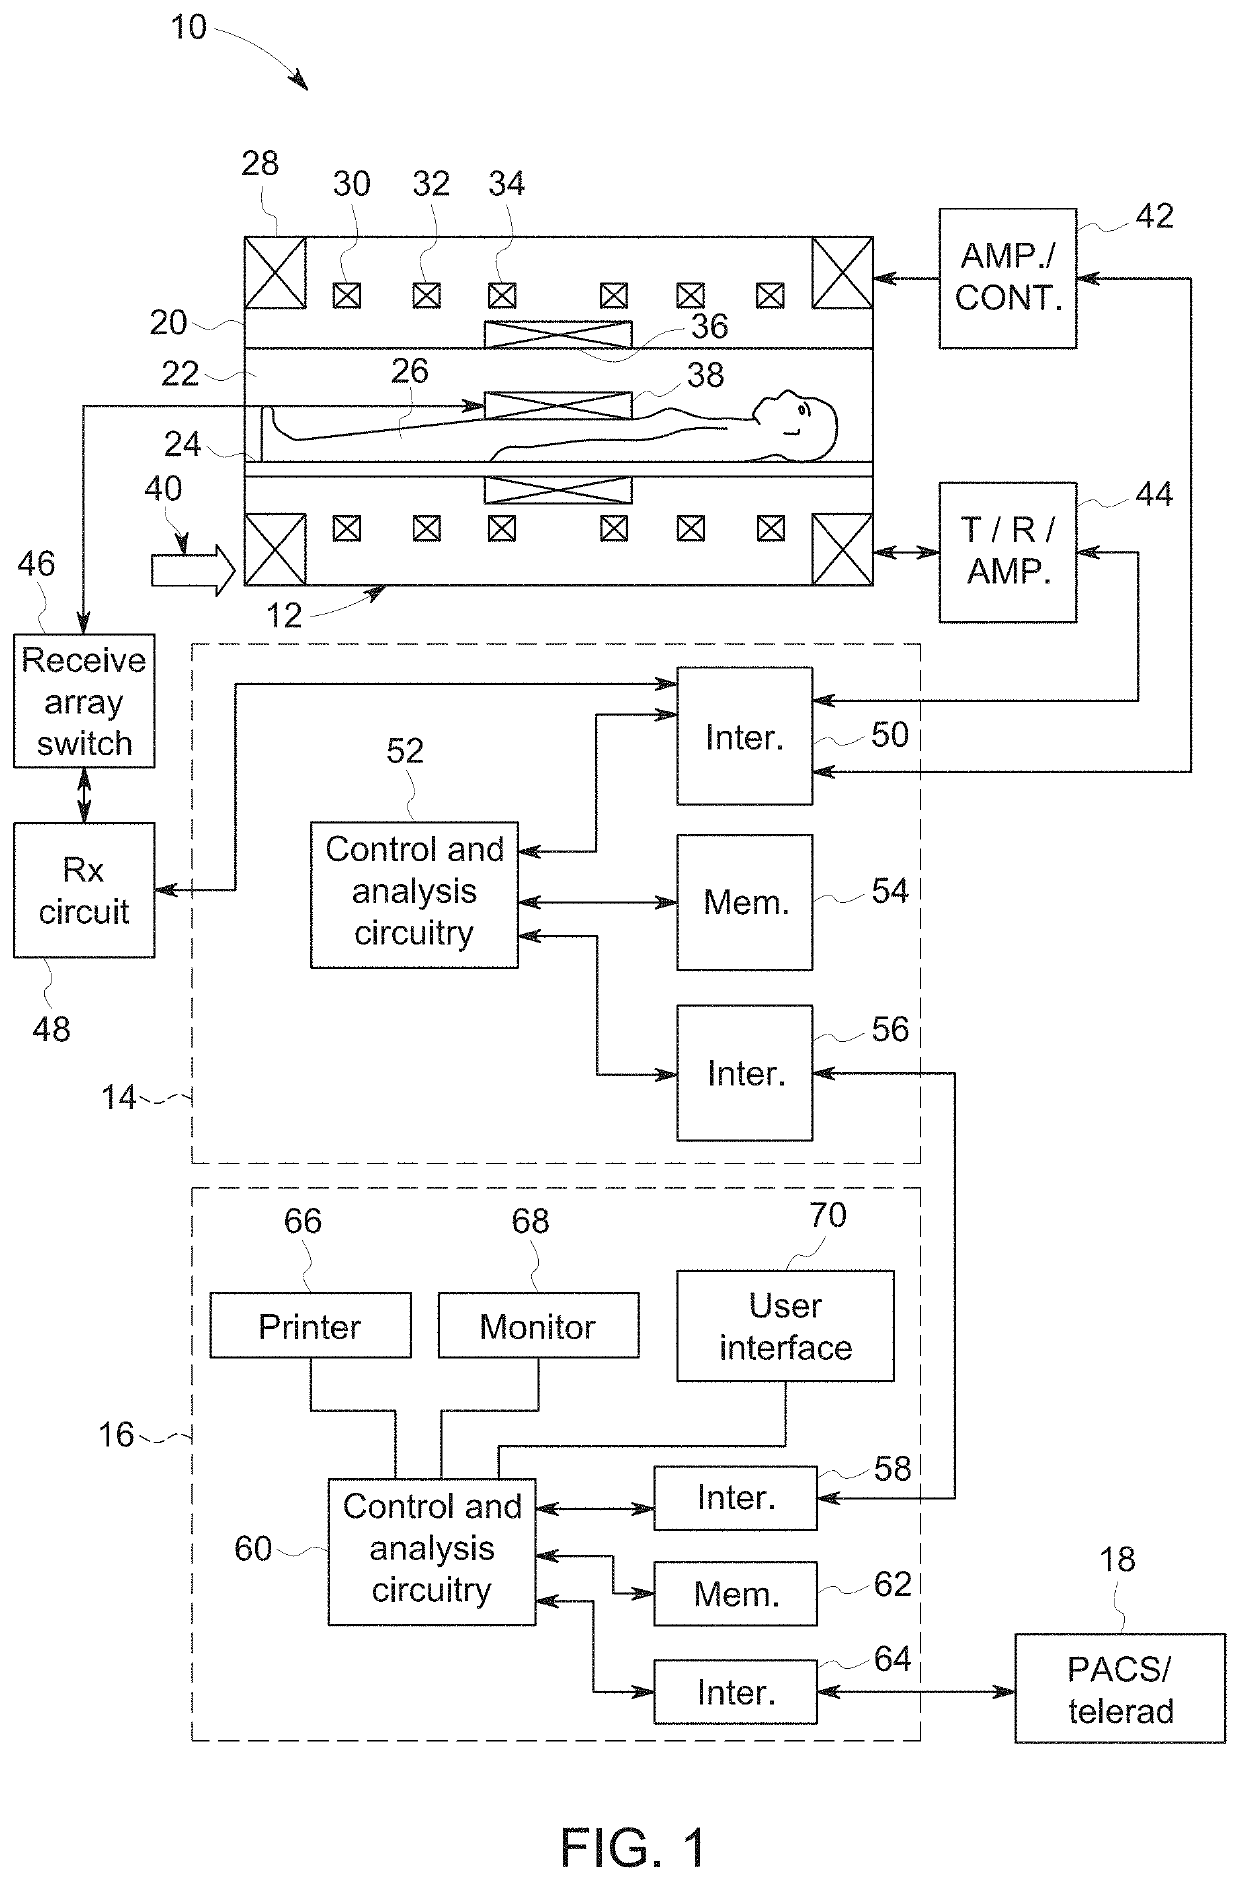 MRI system and method using neural network for detection of patient motion